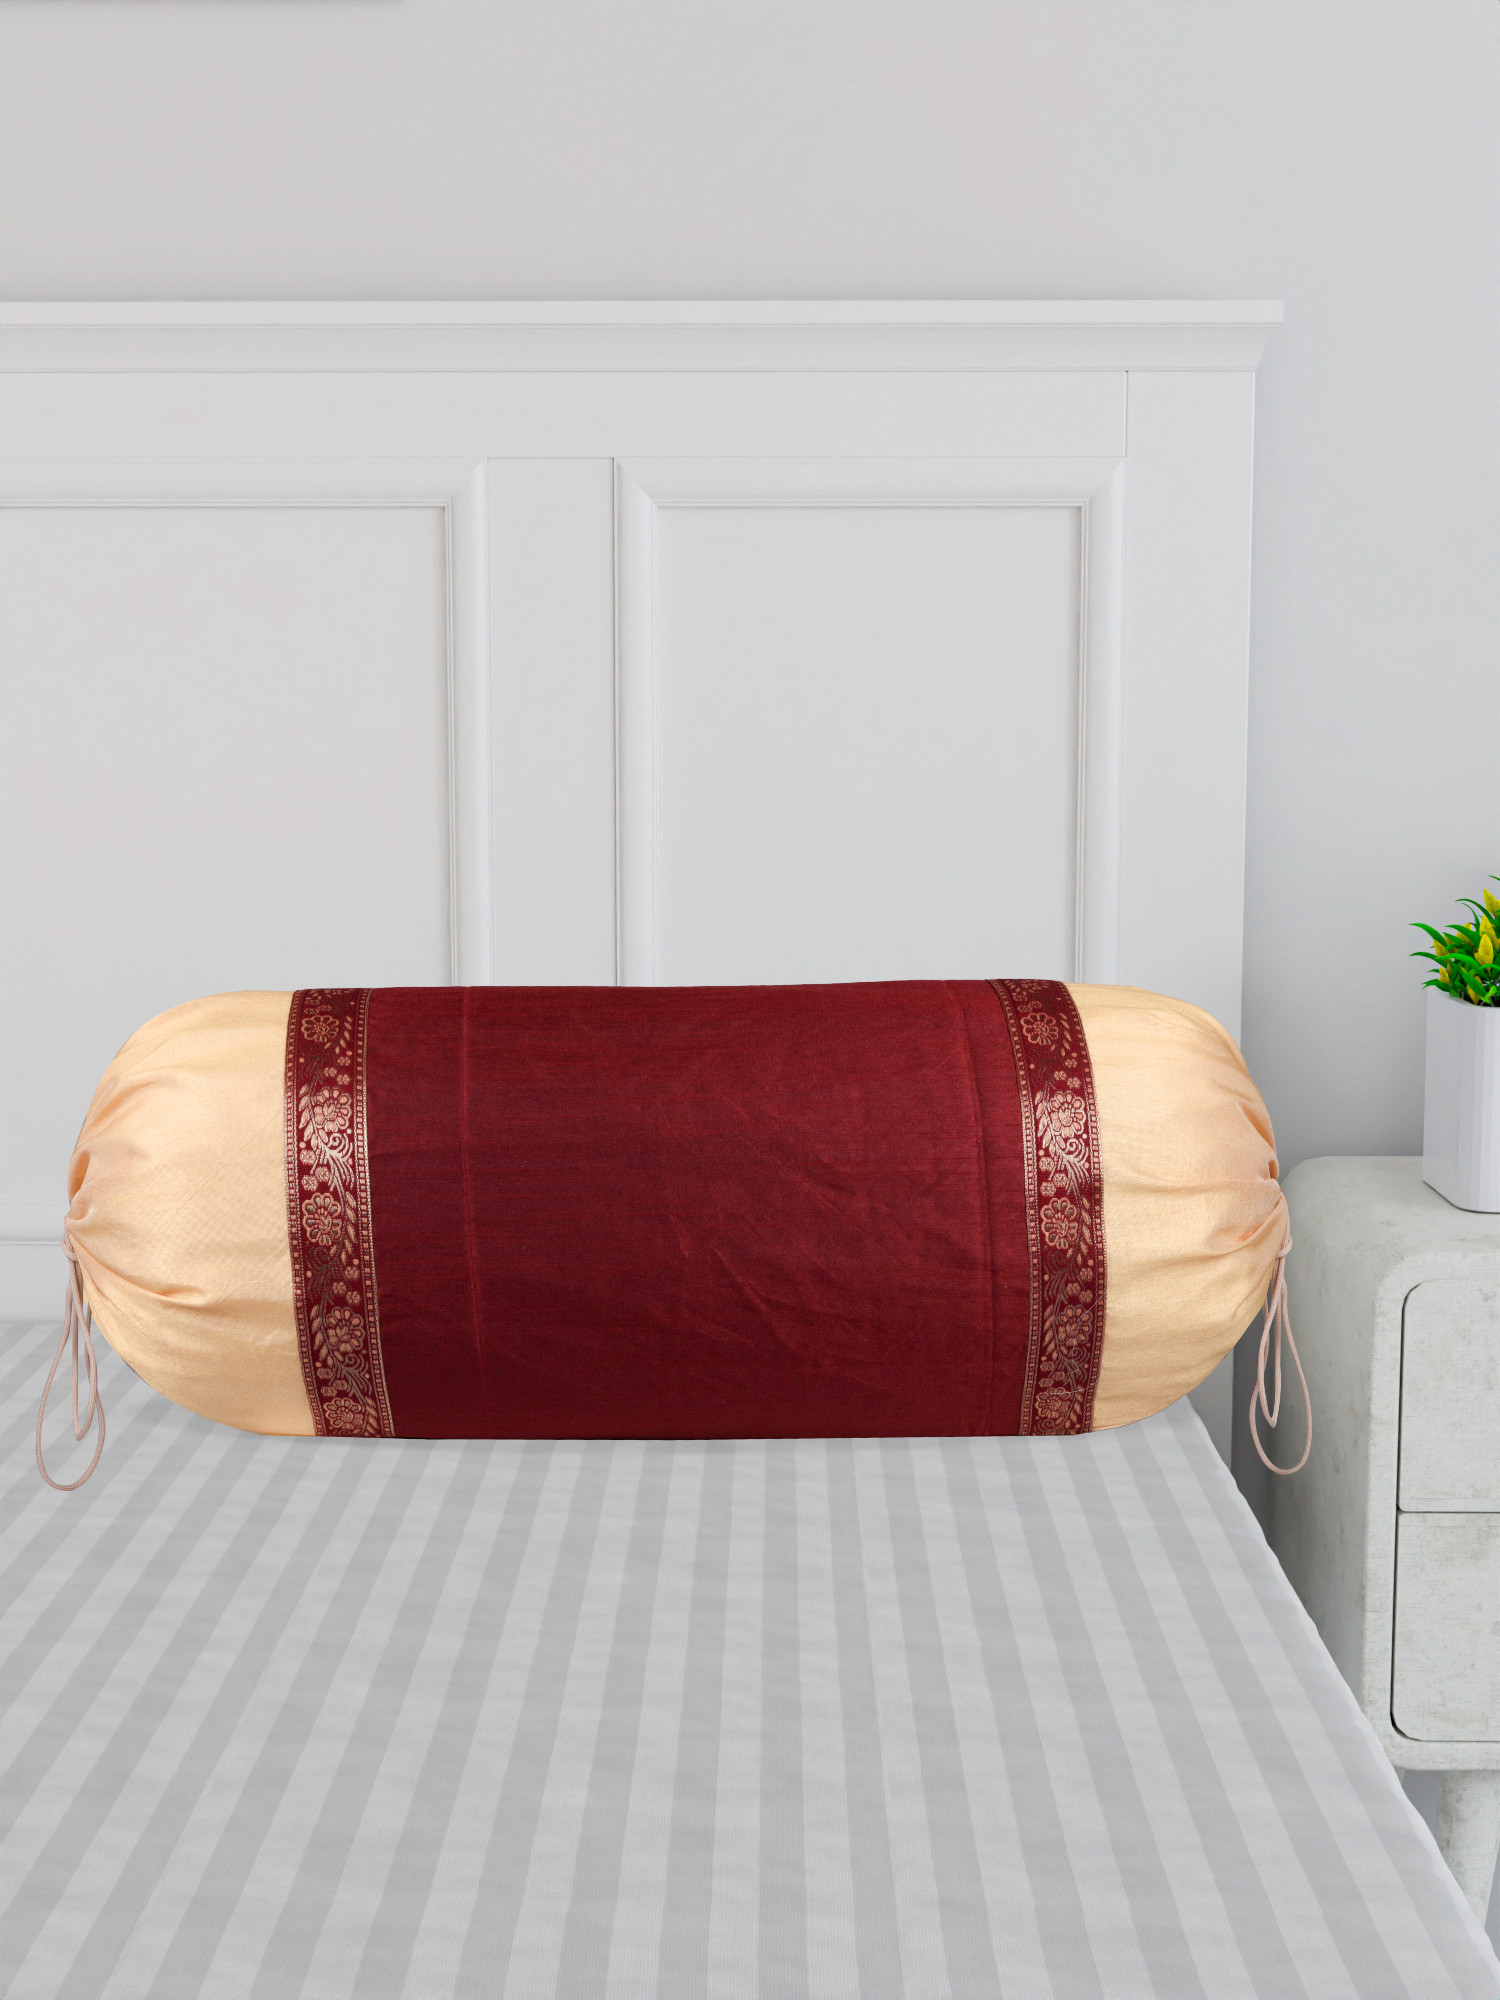 Kuber Industries Bolster Covers | Dupion Polyester Bolster Cover Set | Diwan Bolster Cover Set | Bolster Pillow Cover | Lace Design Masand Cover | 16x32 Inch | Pack of 6 | Maroon